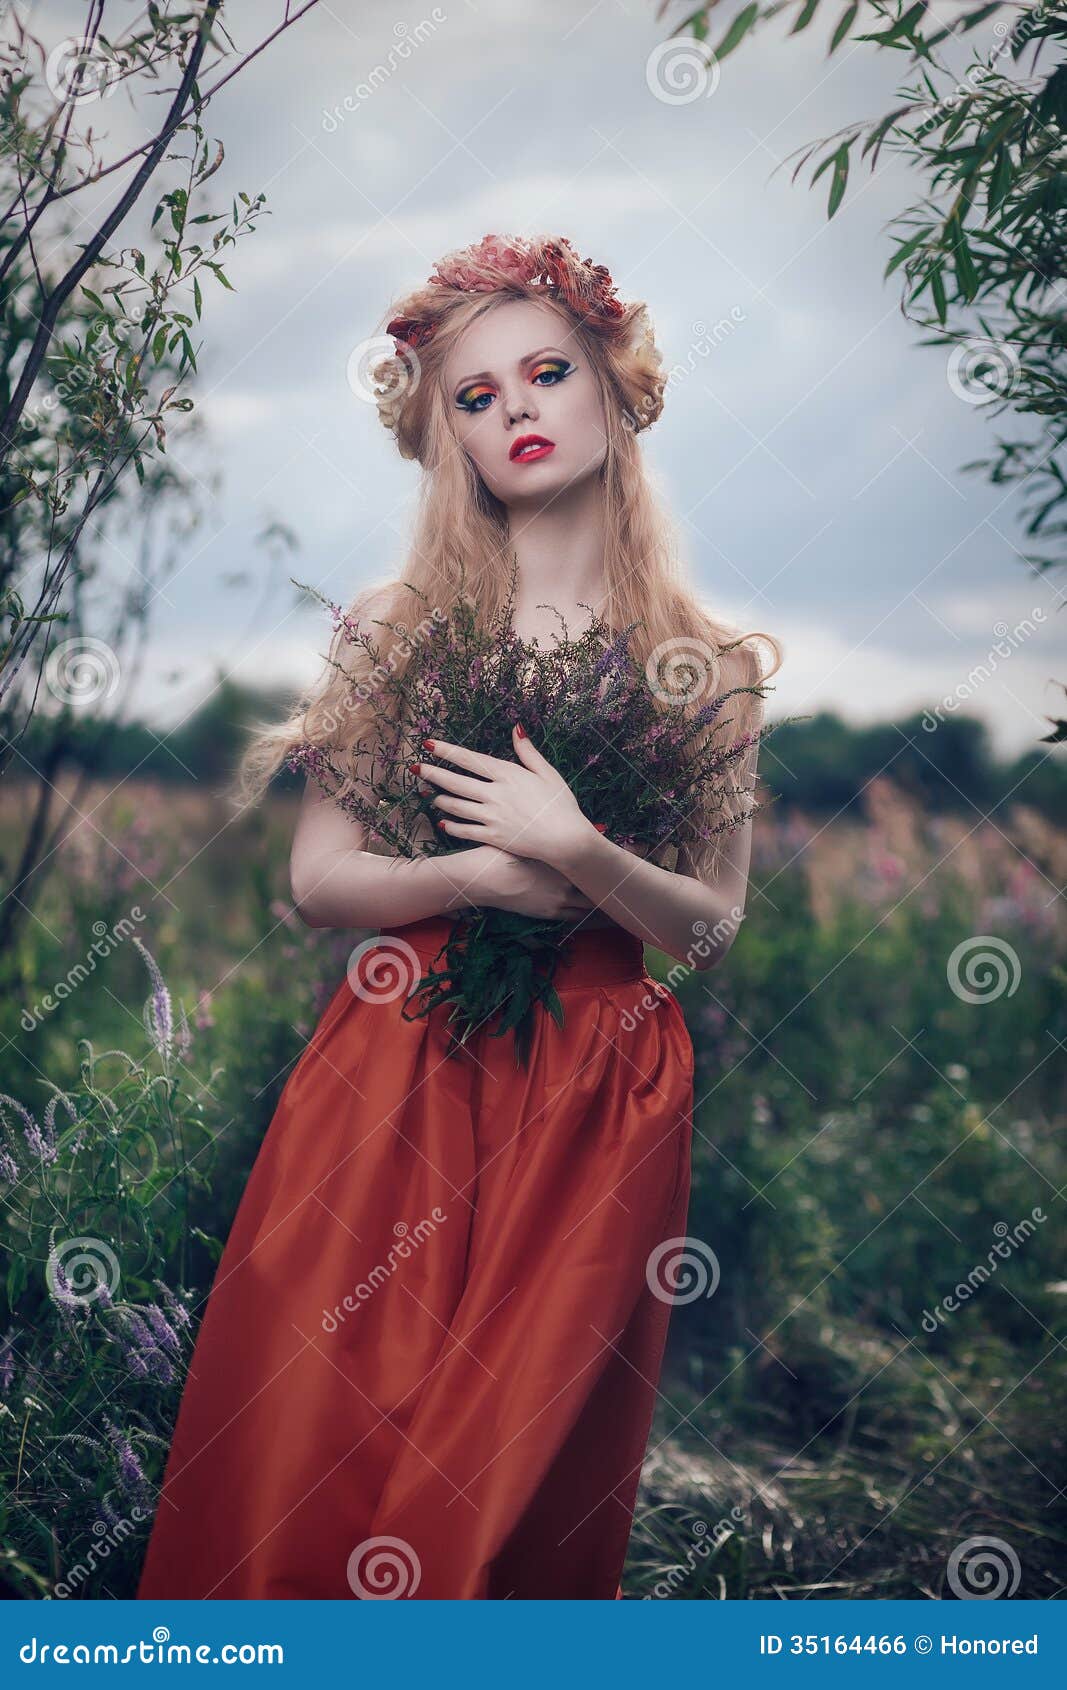 Romantic blond woman stock photo. Image of fashion, color 